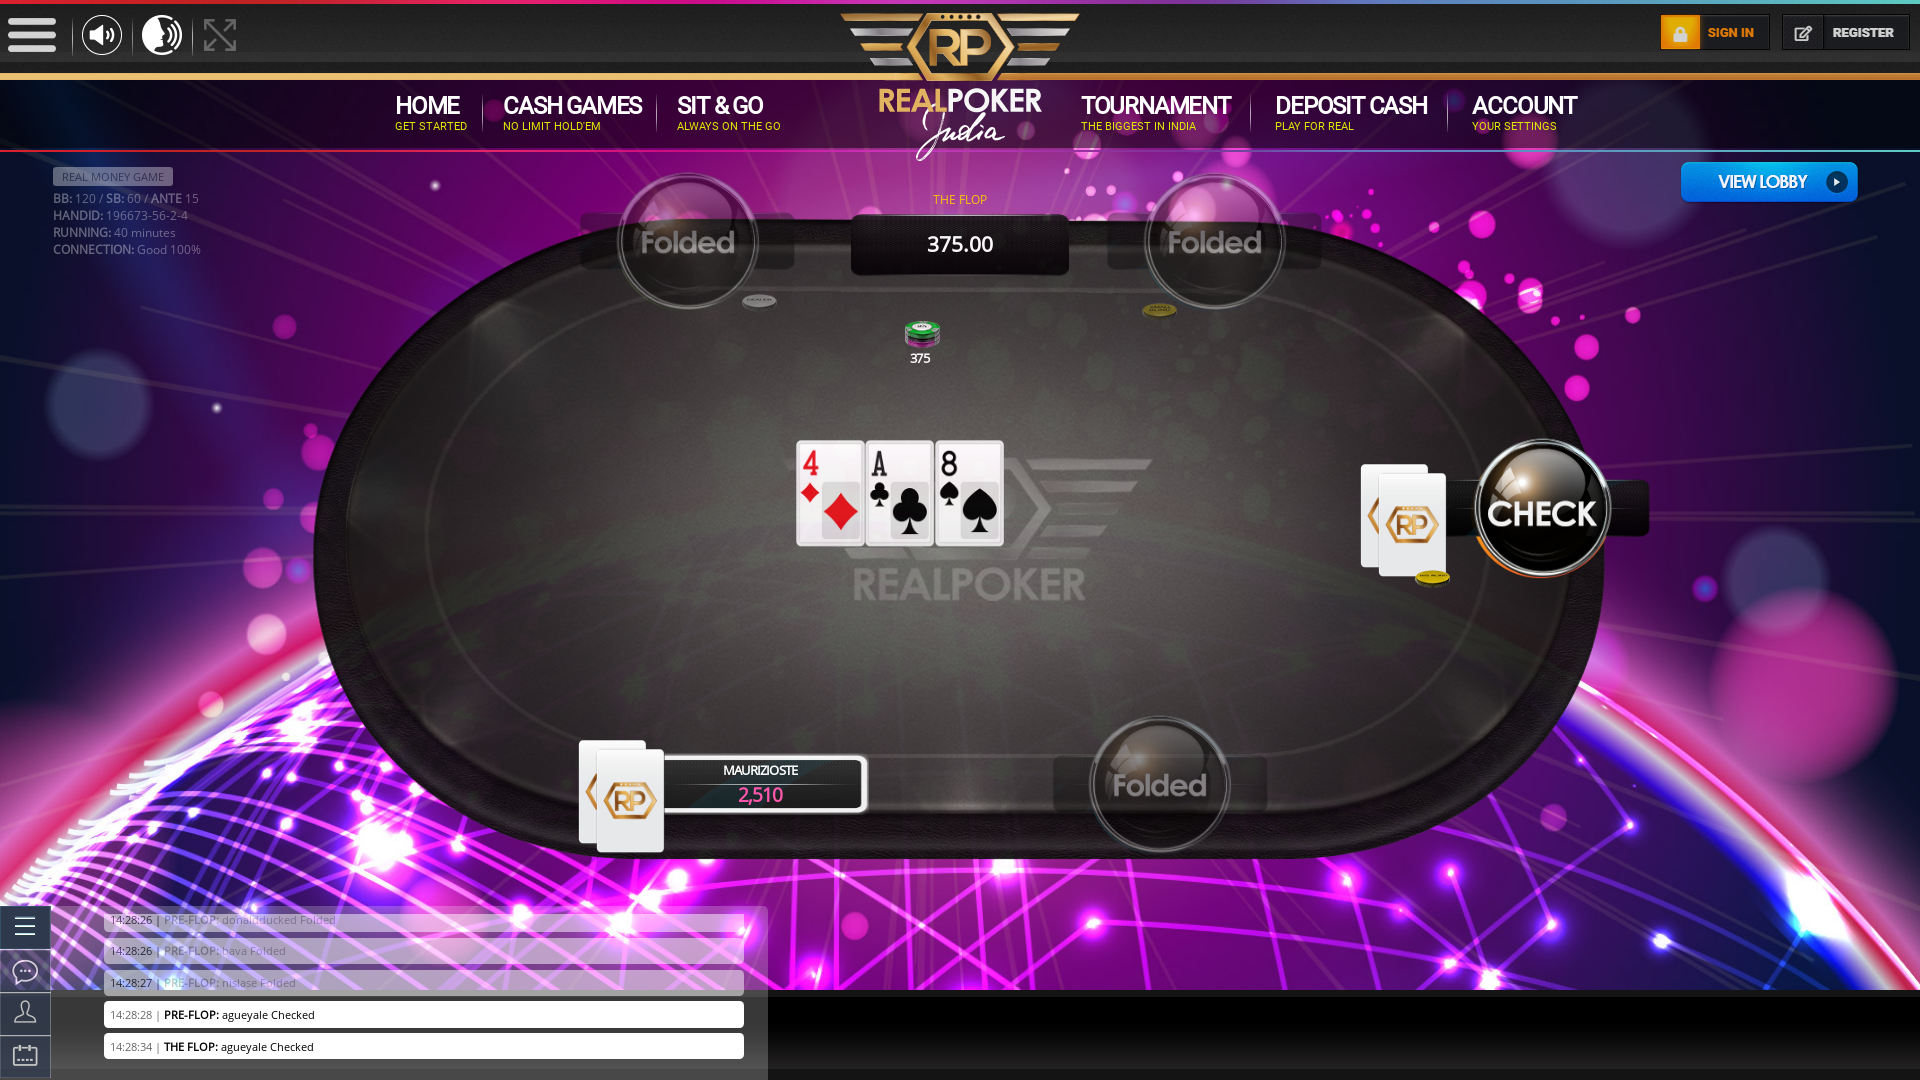 Online poker on a 10 player table in the 40th minute match up